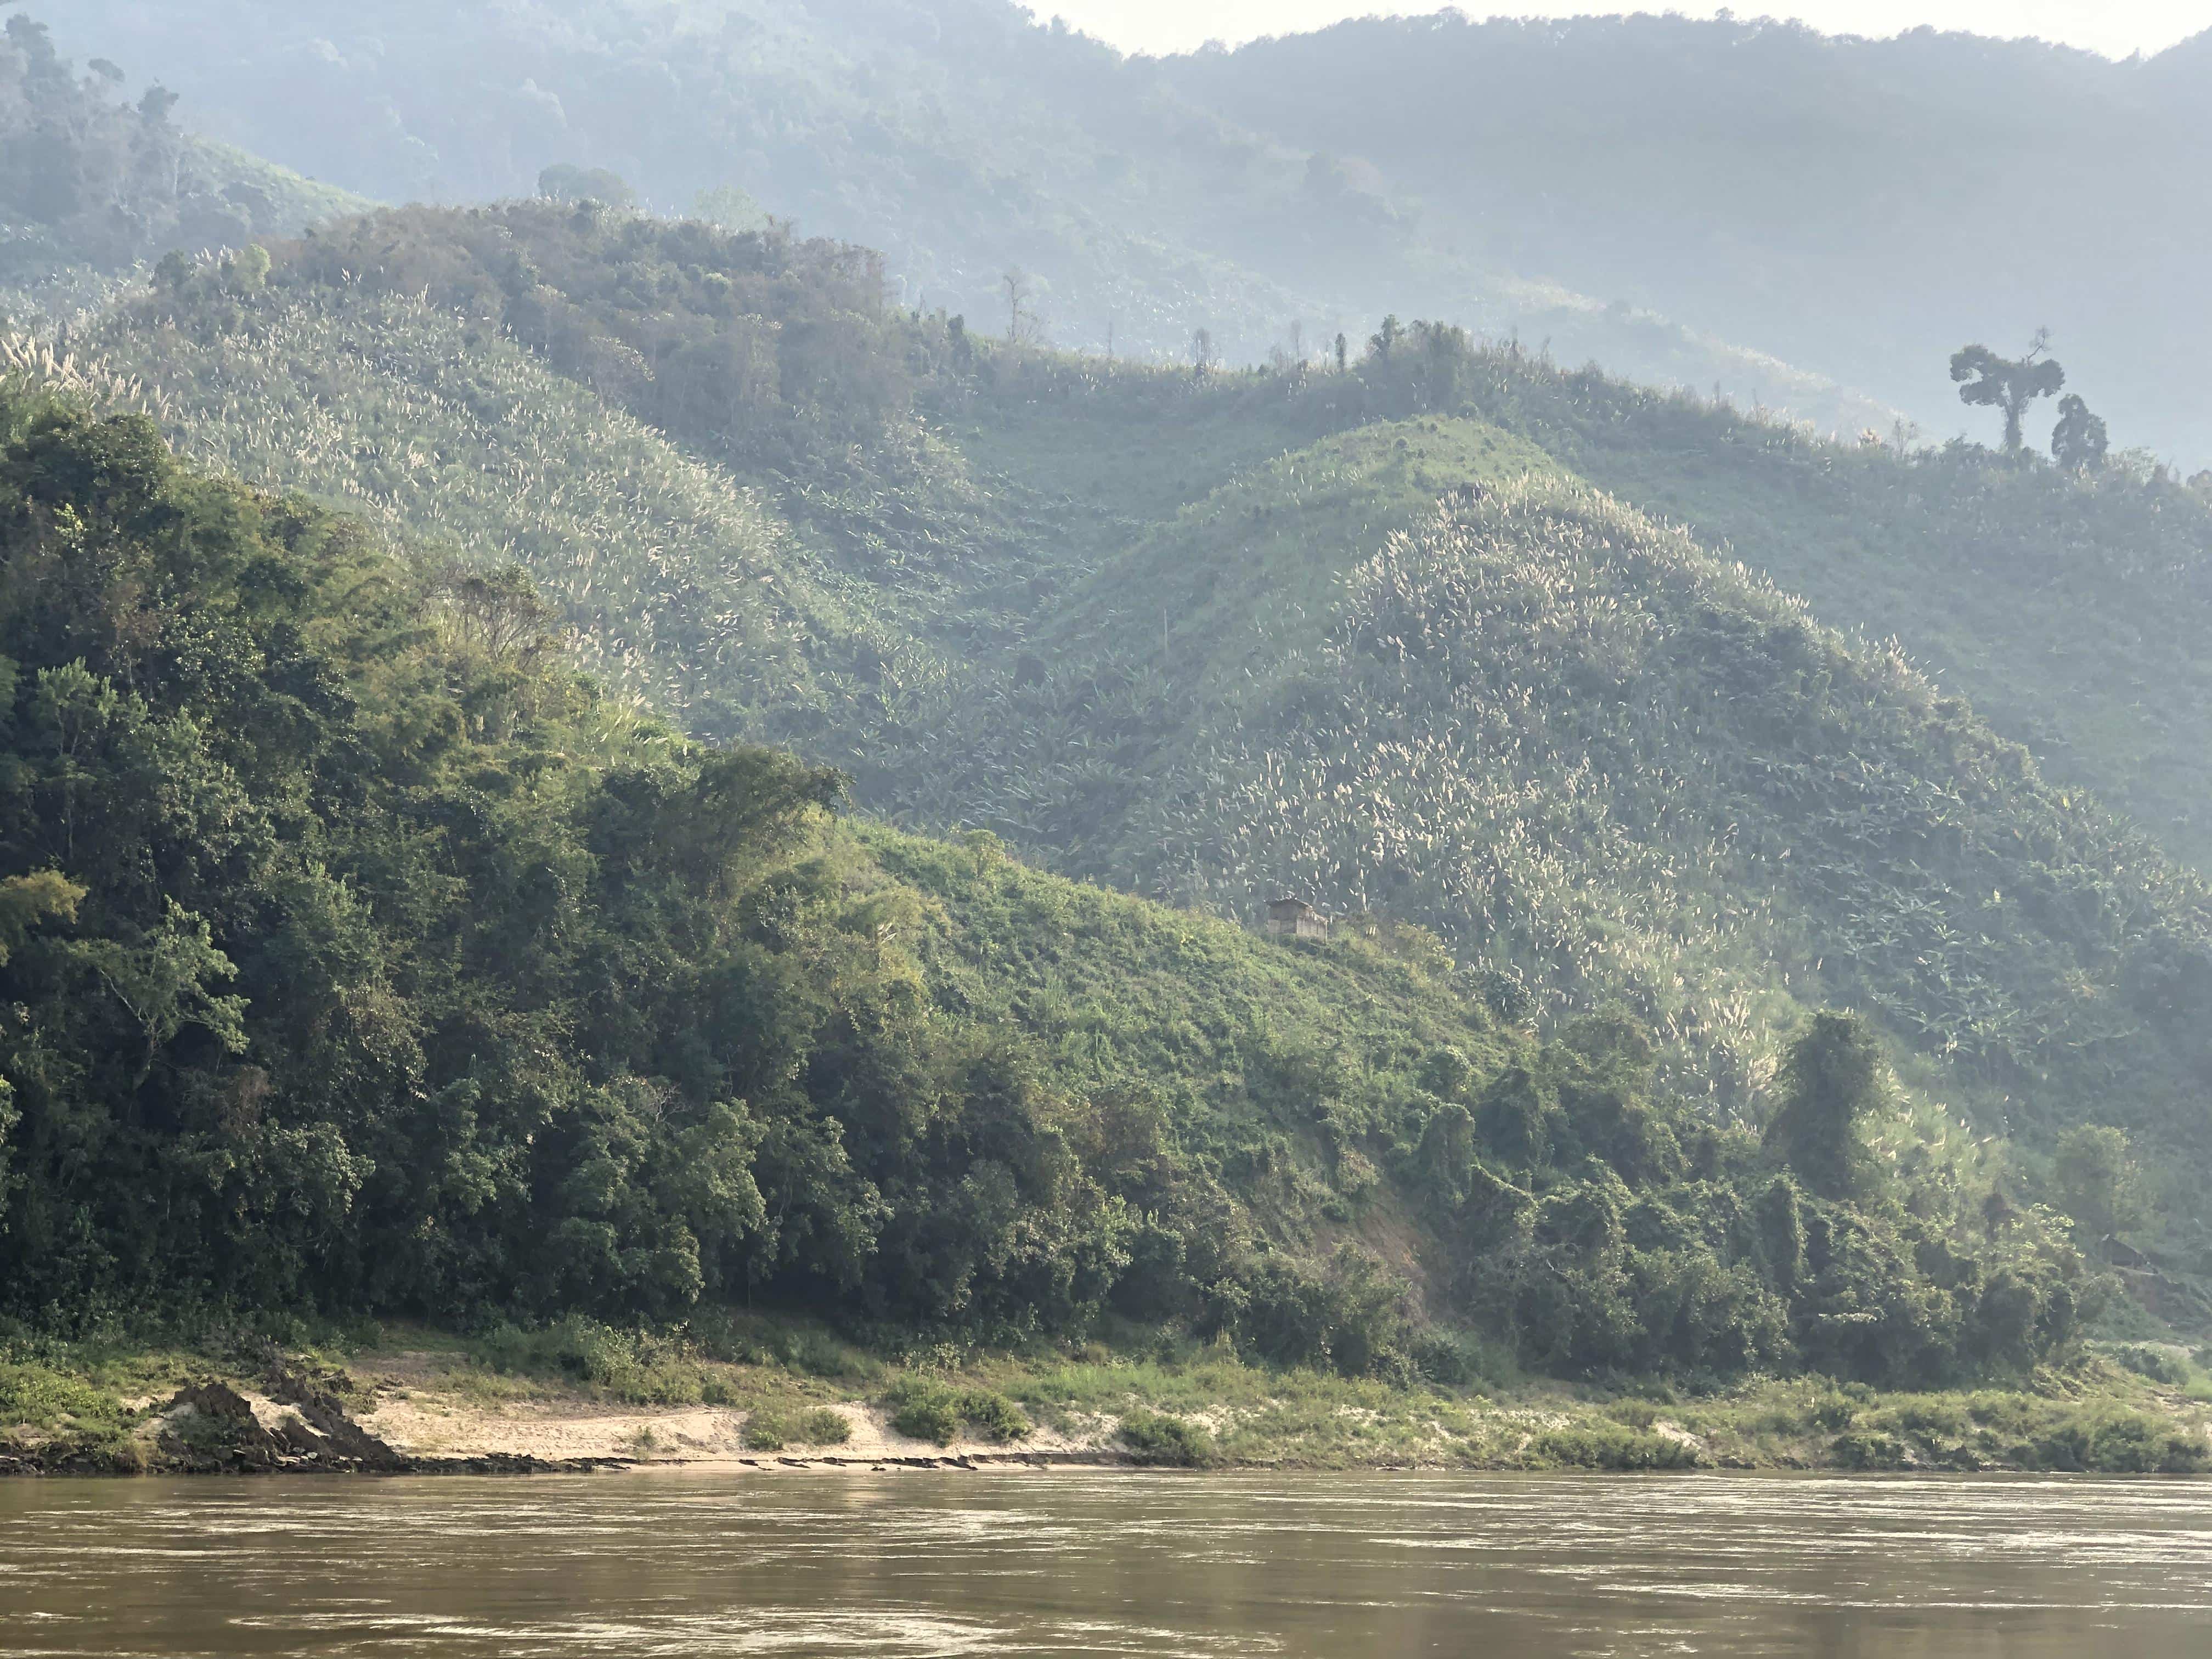 The jungle and The Mekong